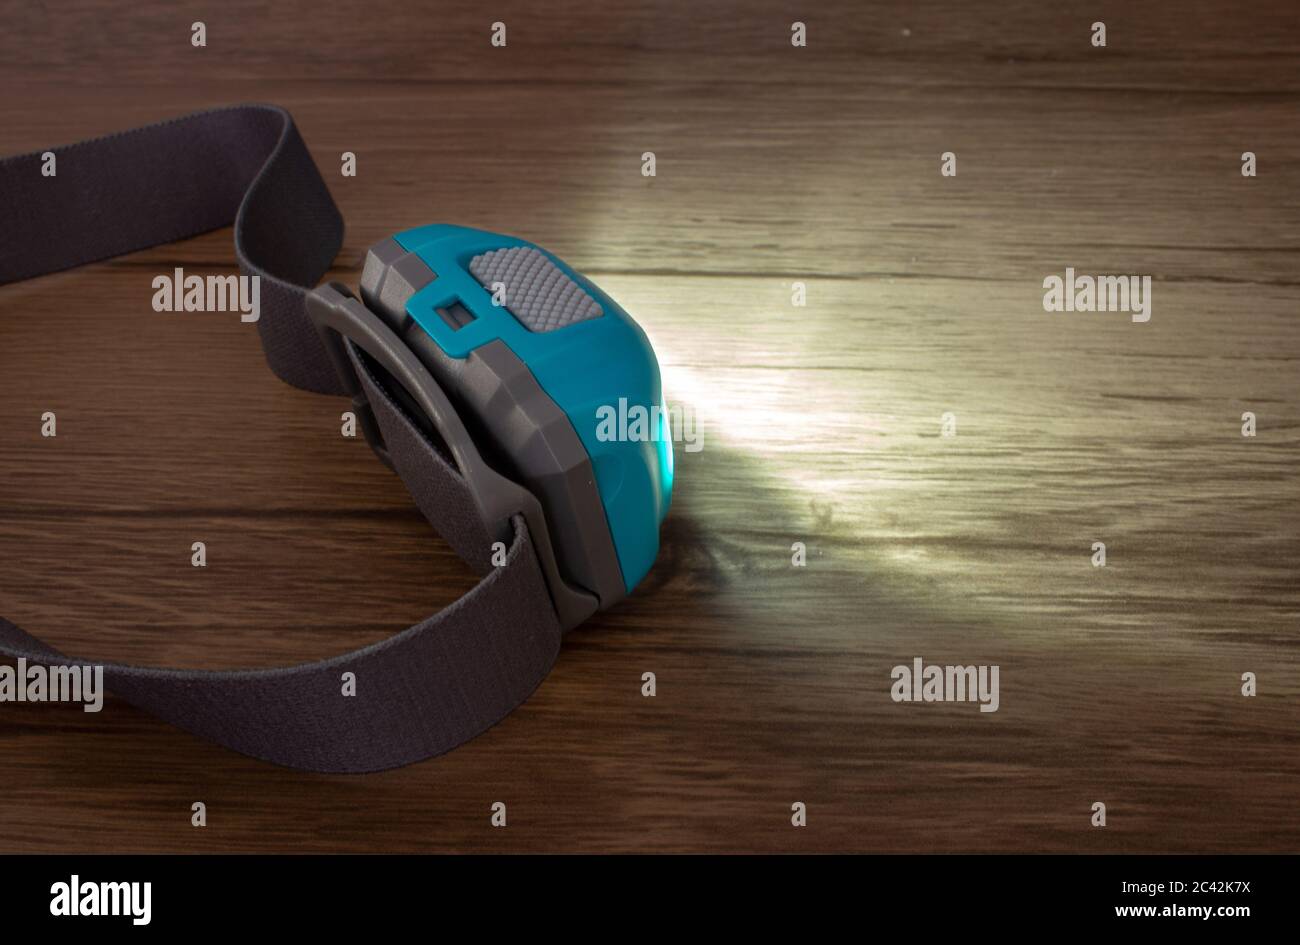 Teal headlamp turned on show the light beam on a wooden surface Stock Photo